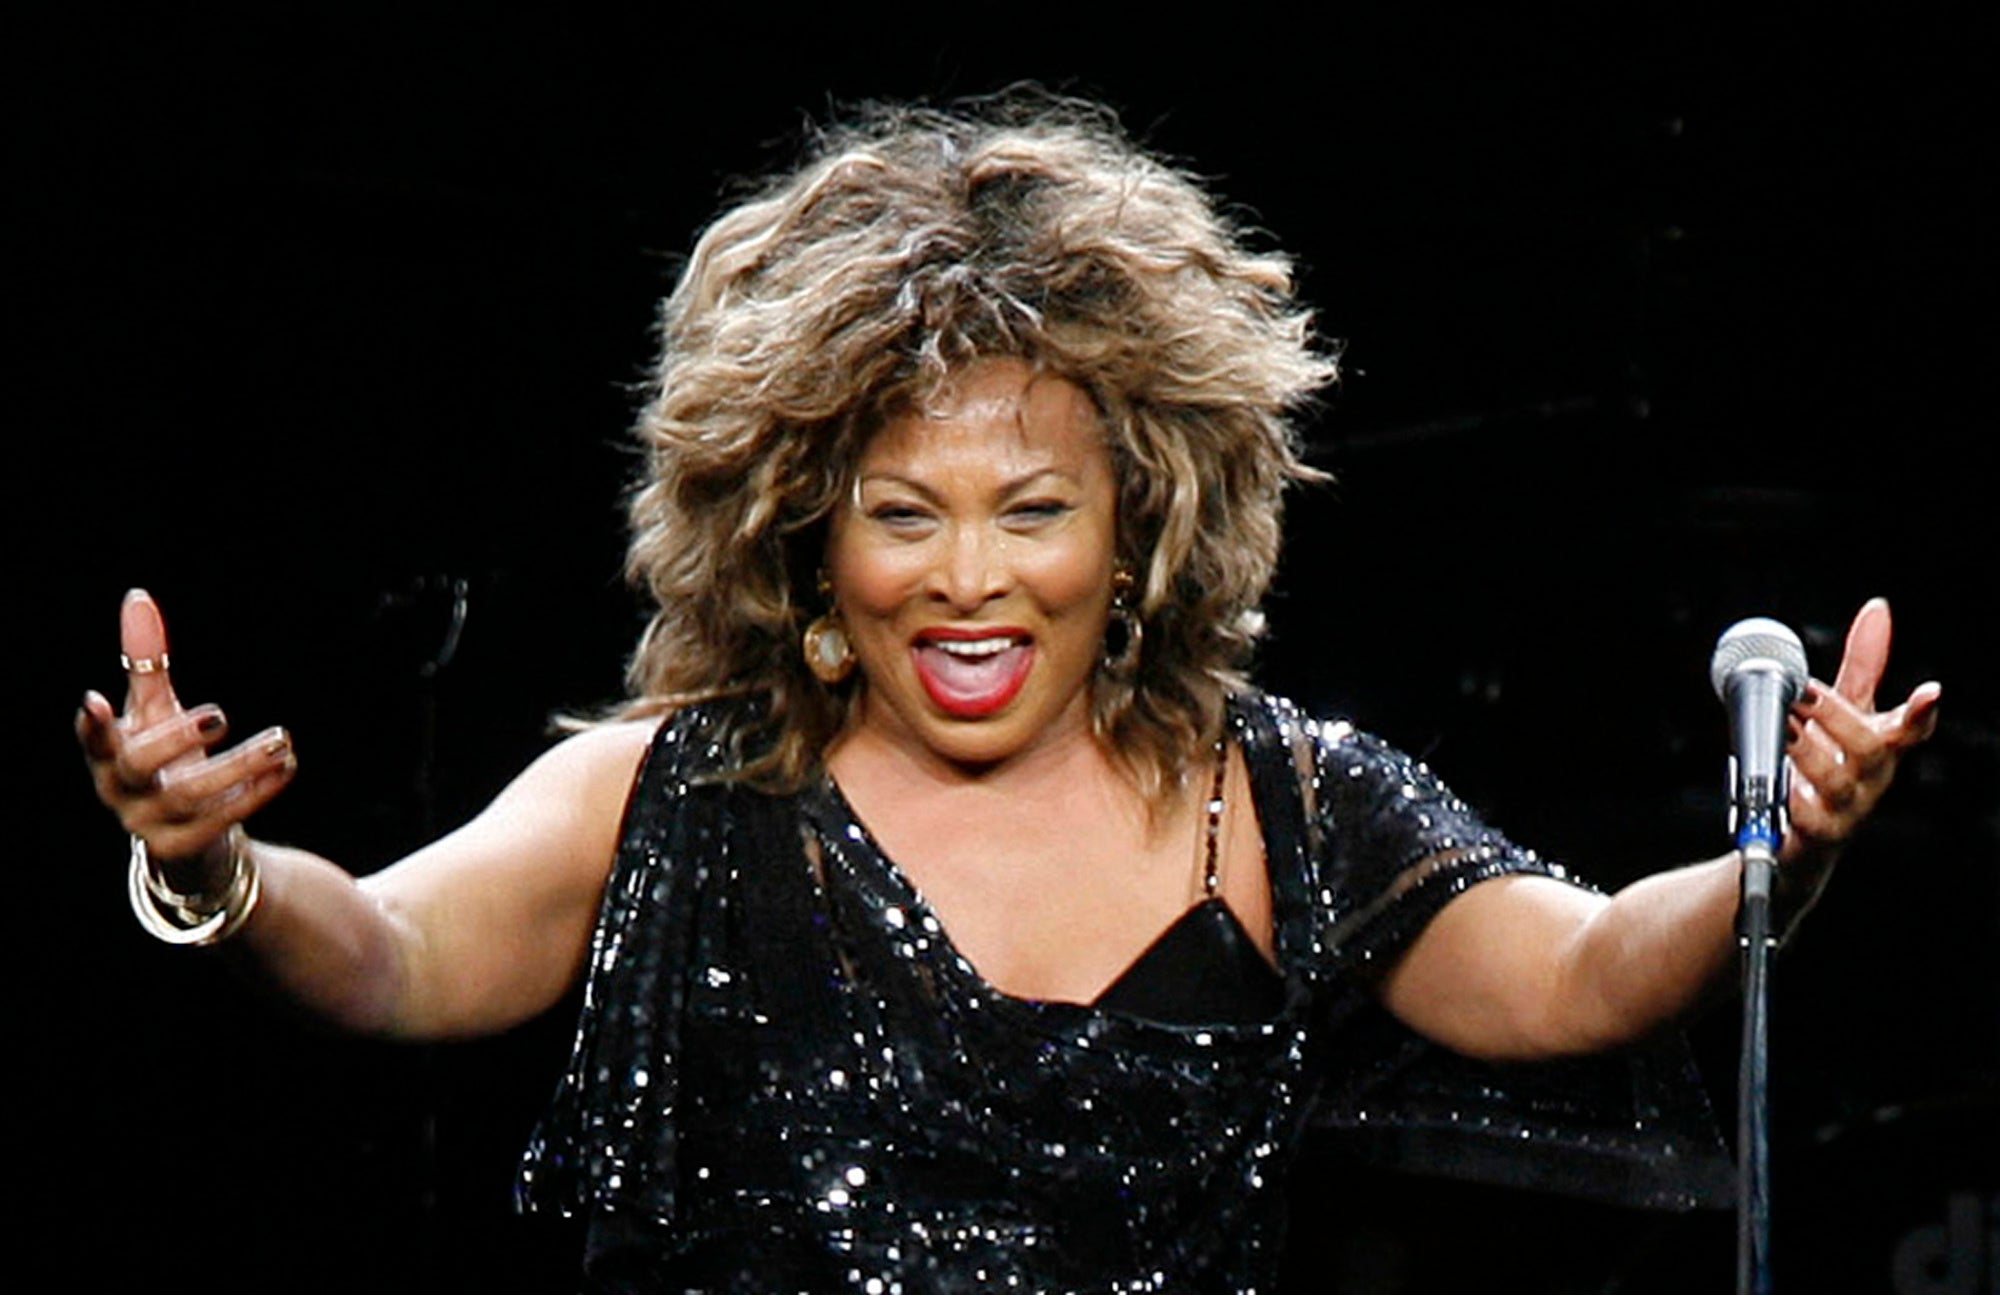 Tina Turner performs in a concert in Cologne, Germany, on Jan. 14, 2009.